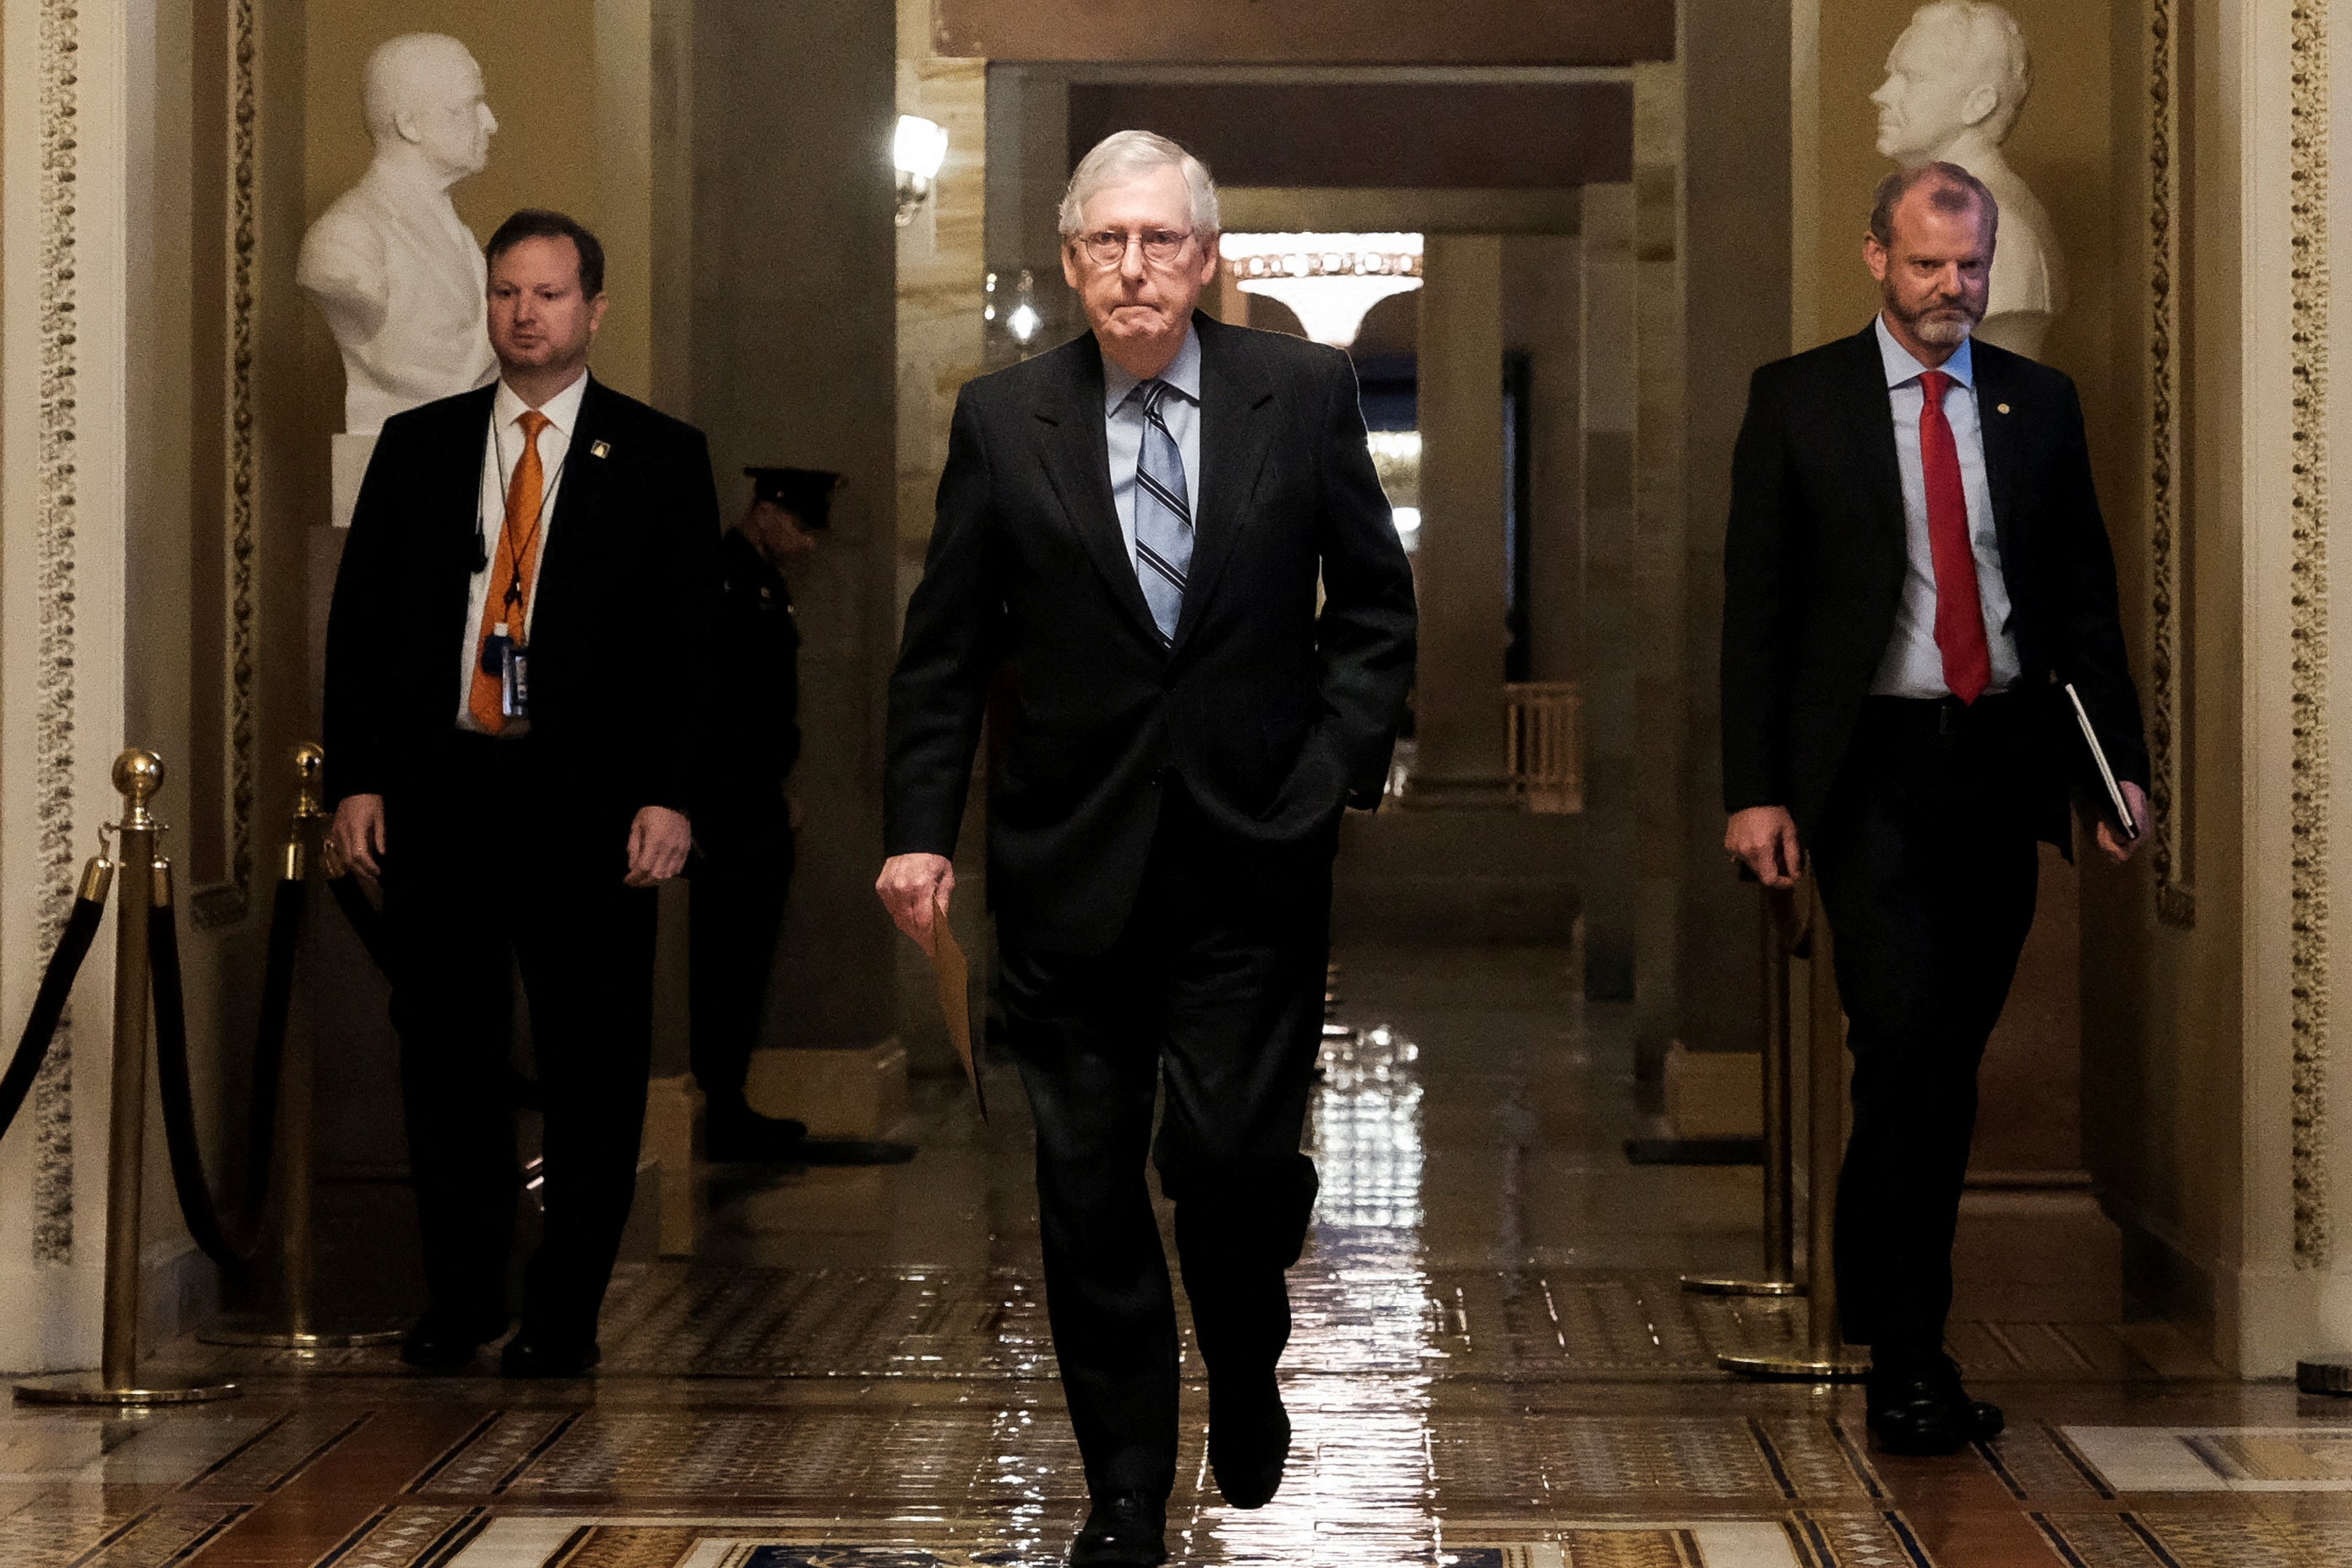 Mitch McConnell, flanked by two men, walks through the Capitol, with some statues behind him.